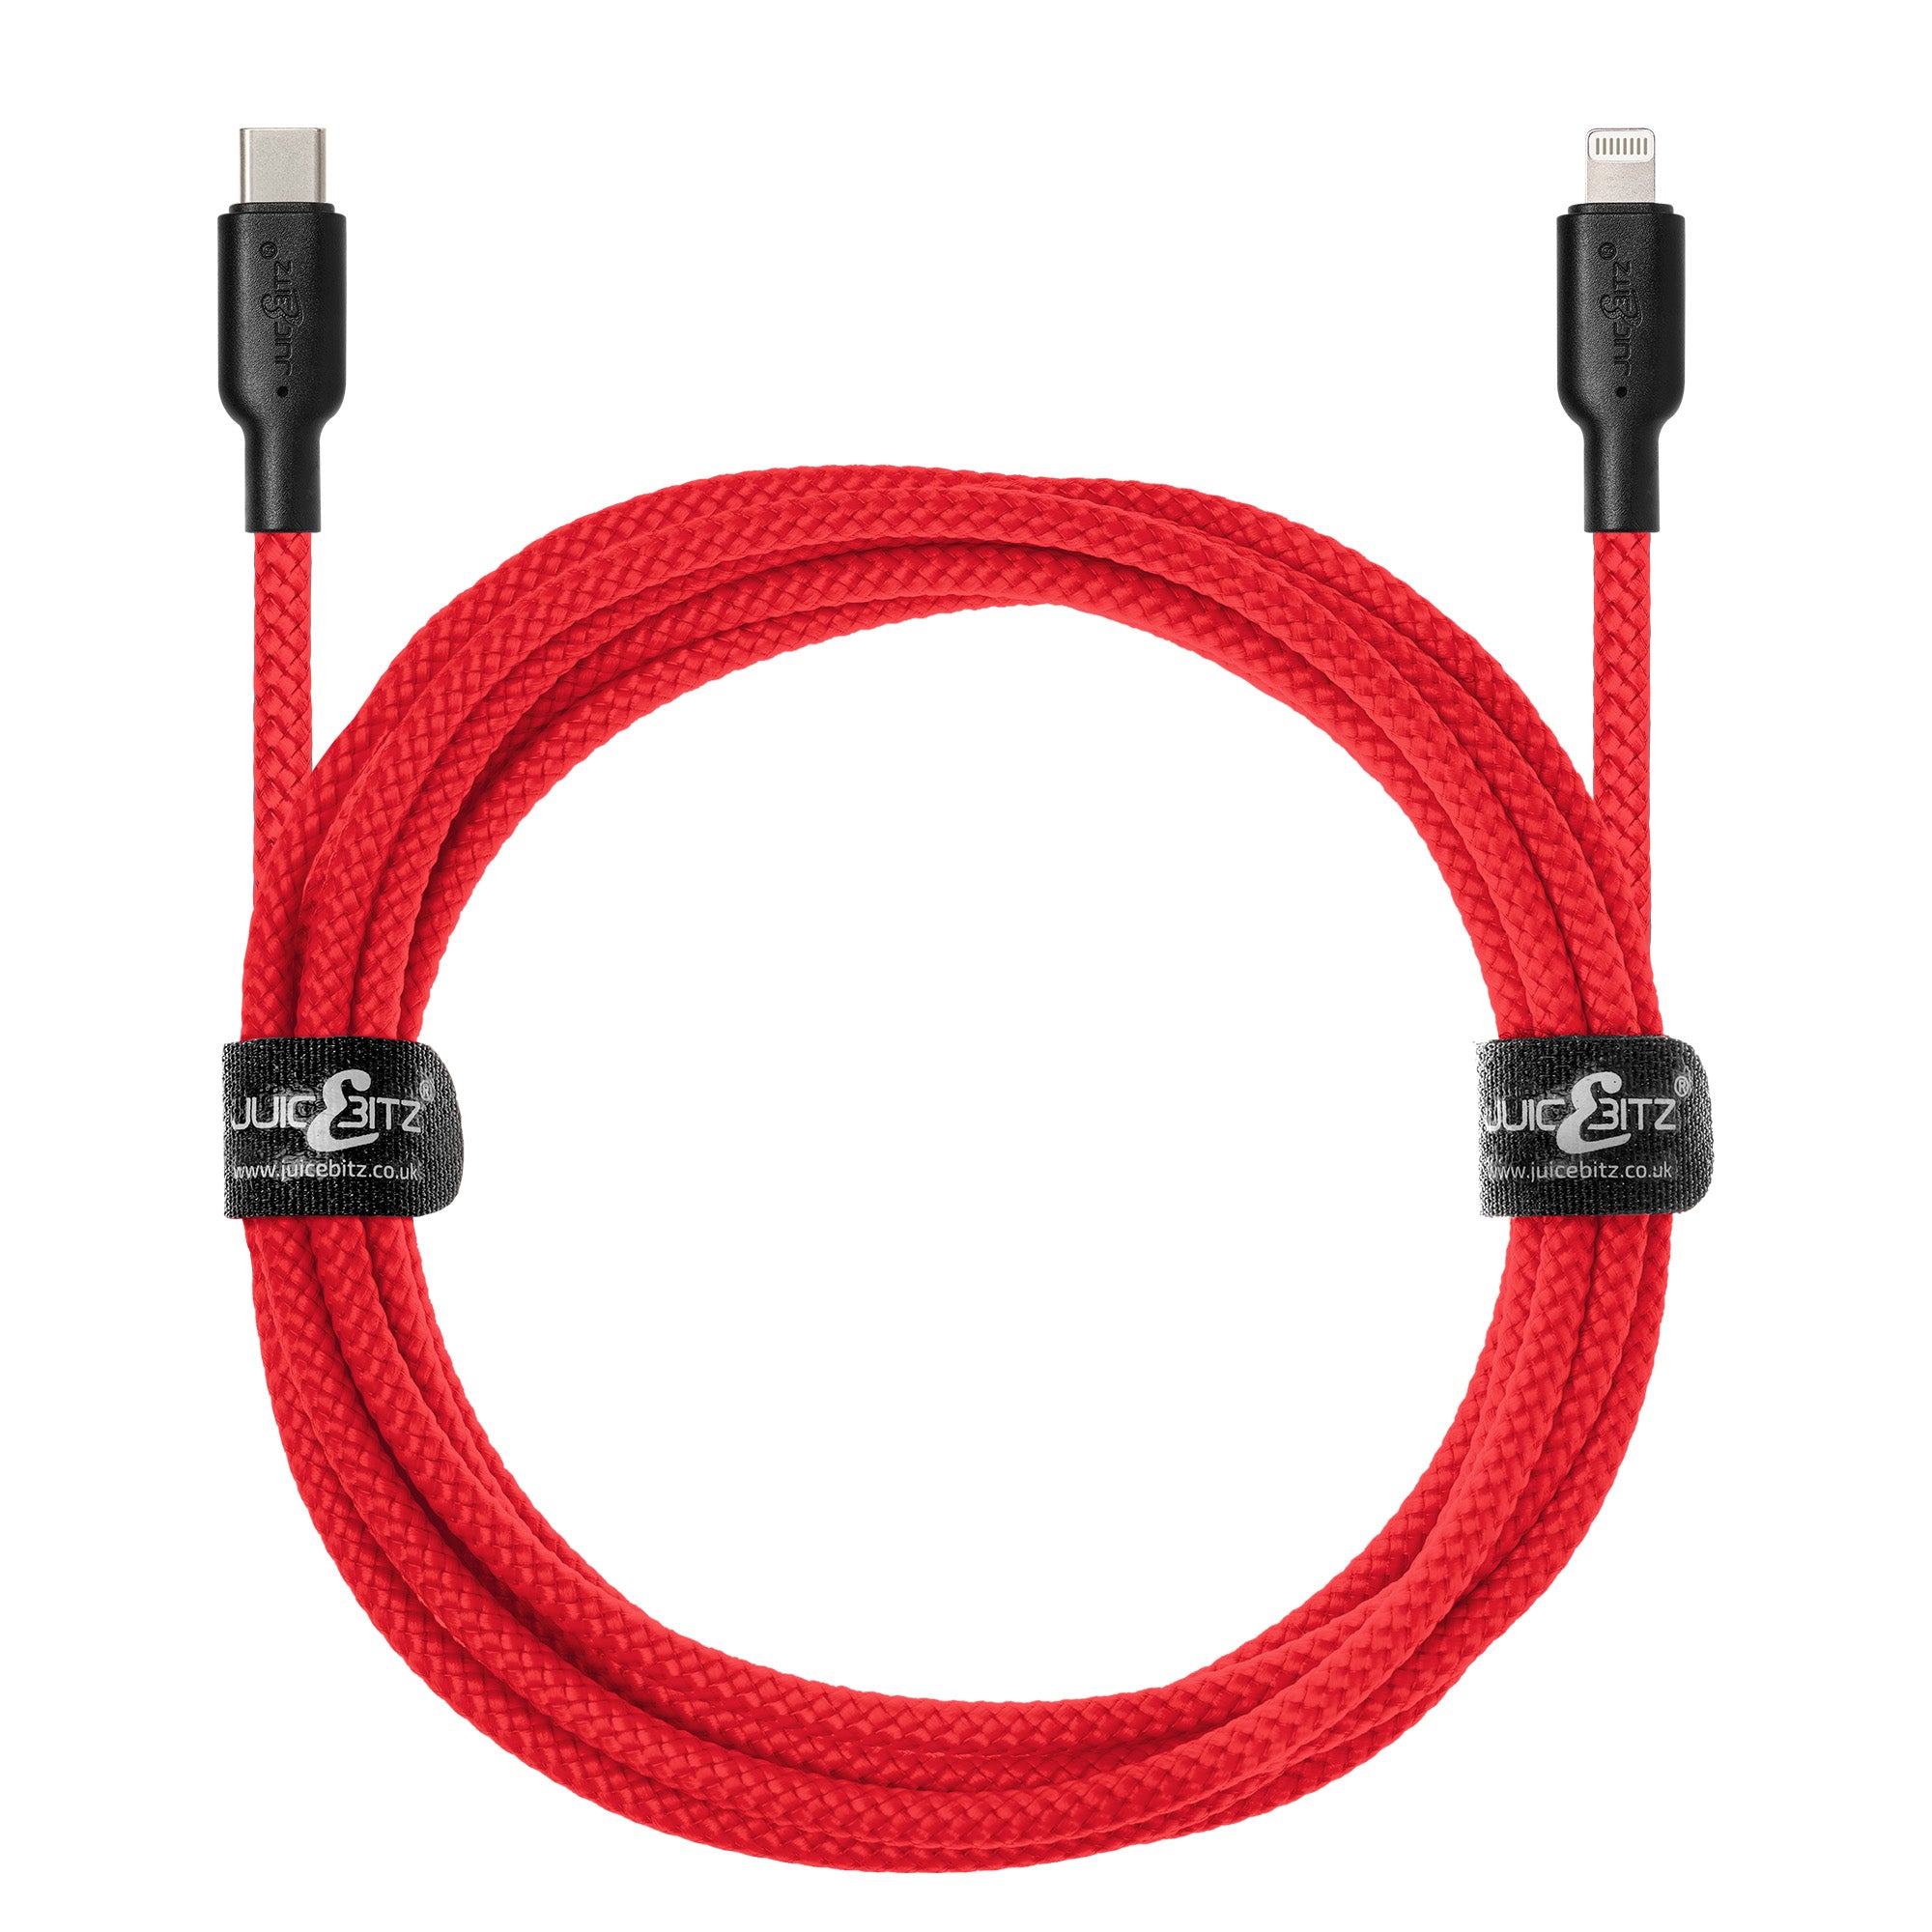 Braided Heavy Duty USB-C Fast Charger Data Sync Cable for iPhone, iPad, iPod - Red